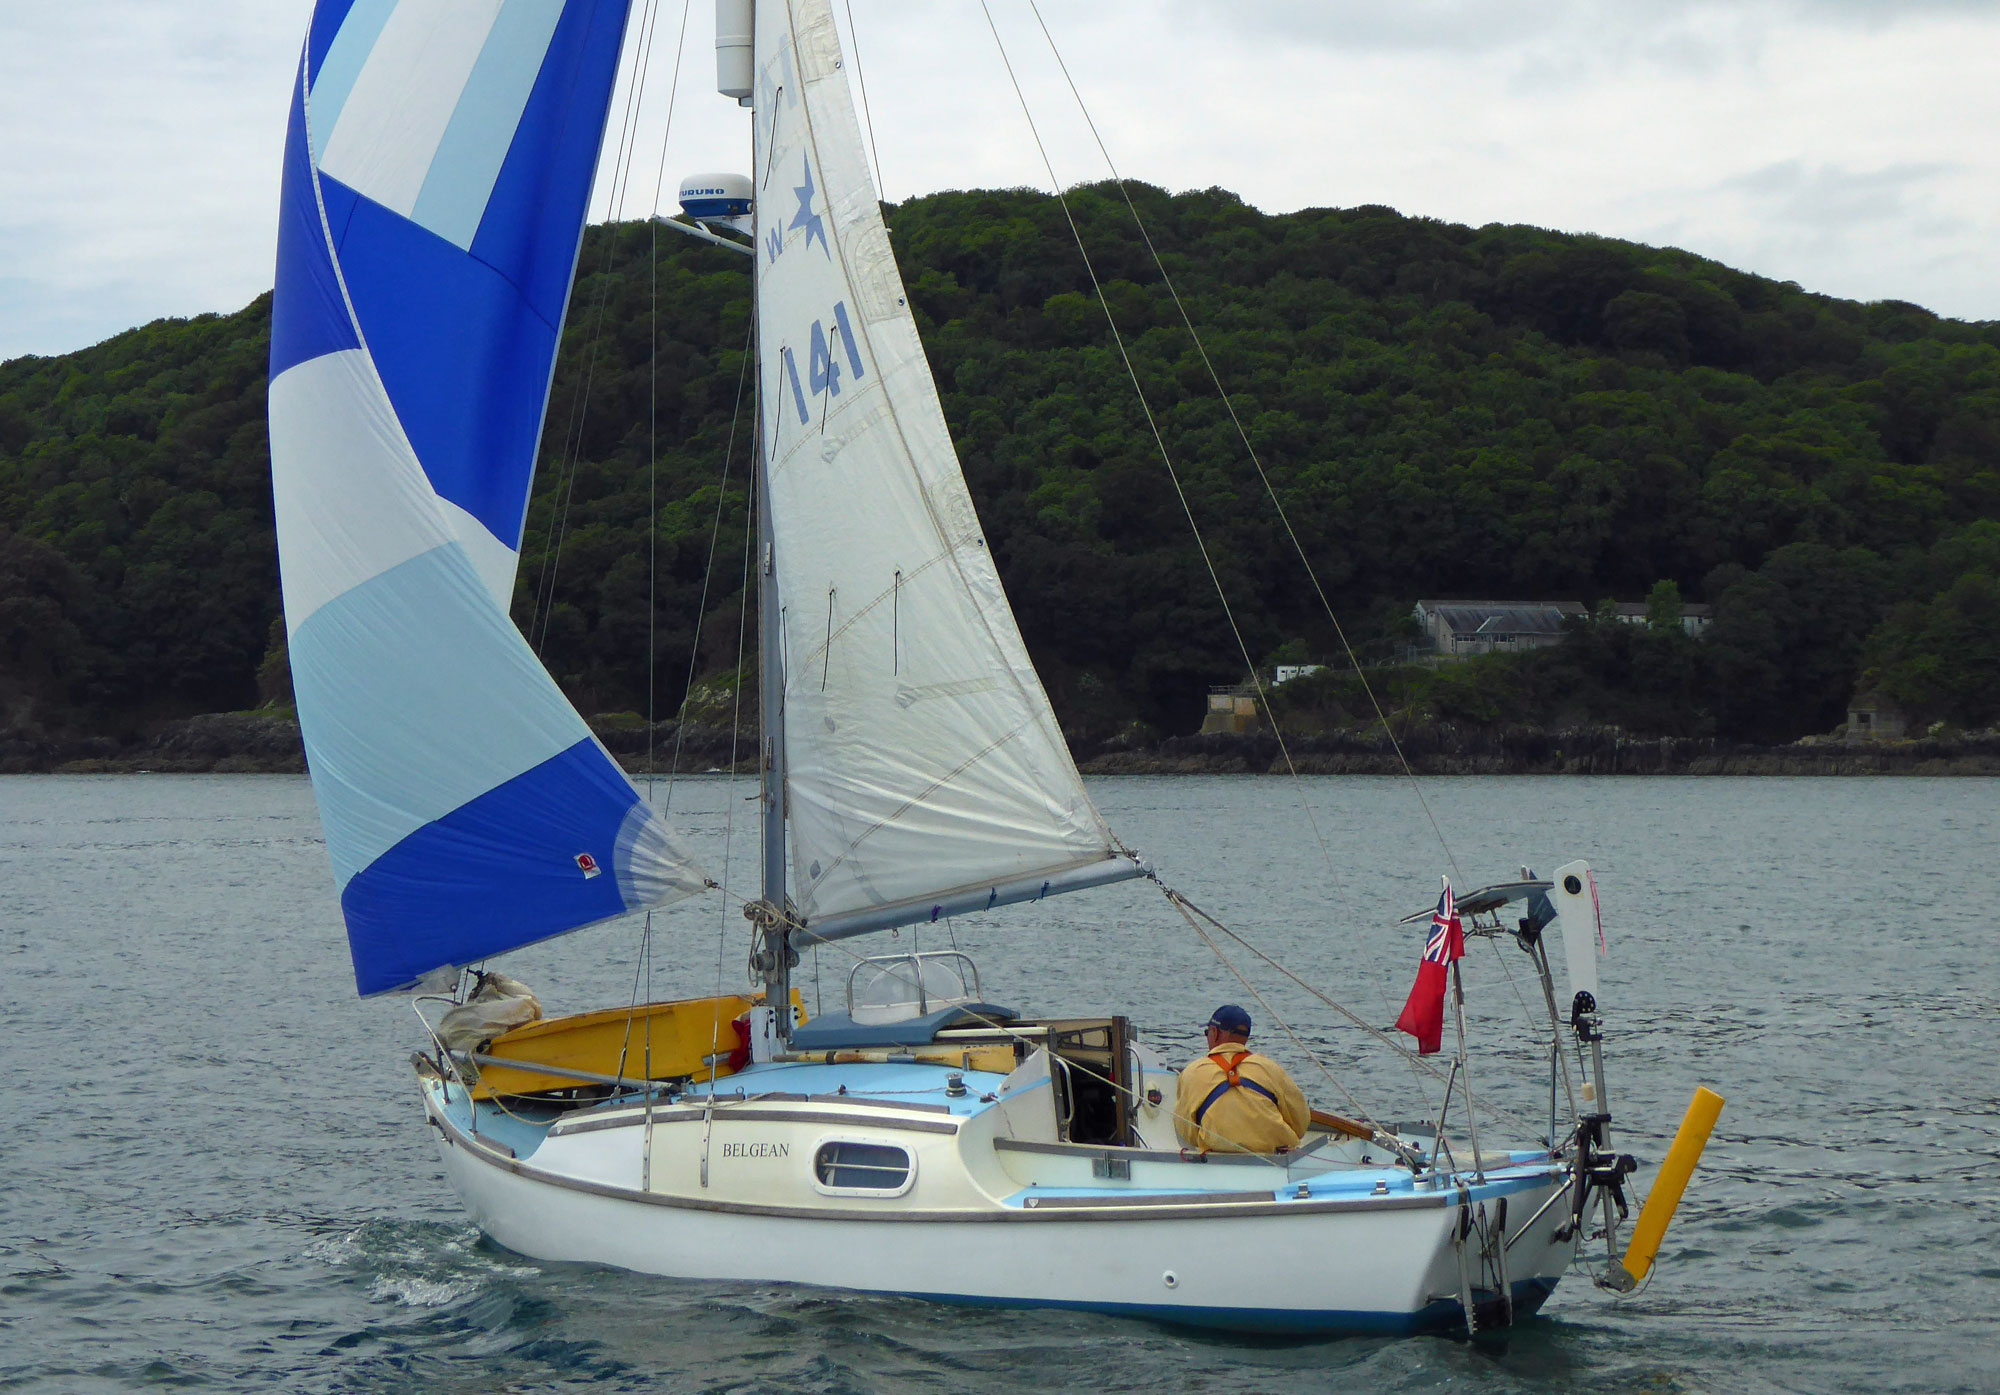 The Best Cruising Sailboats and Their Fundamental Qualities